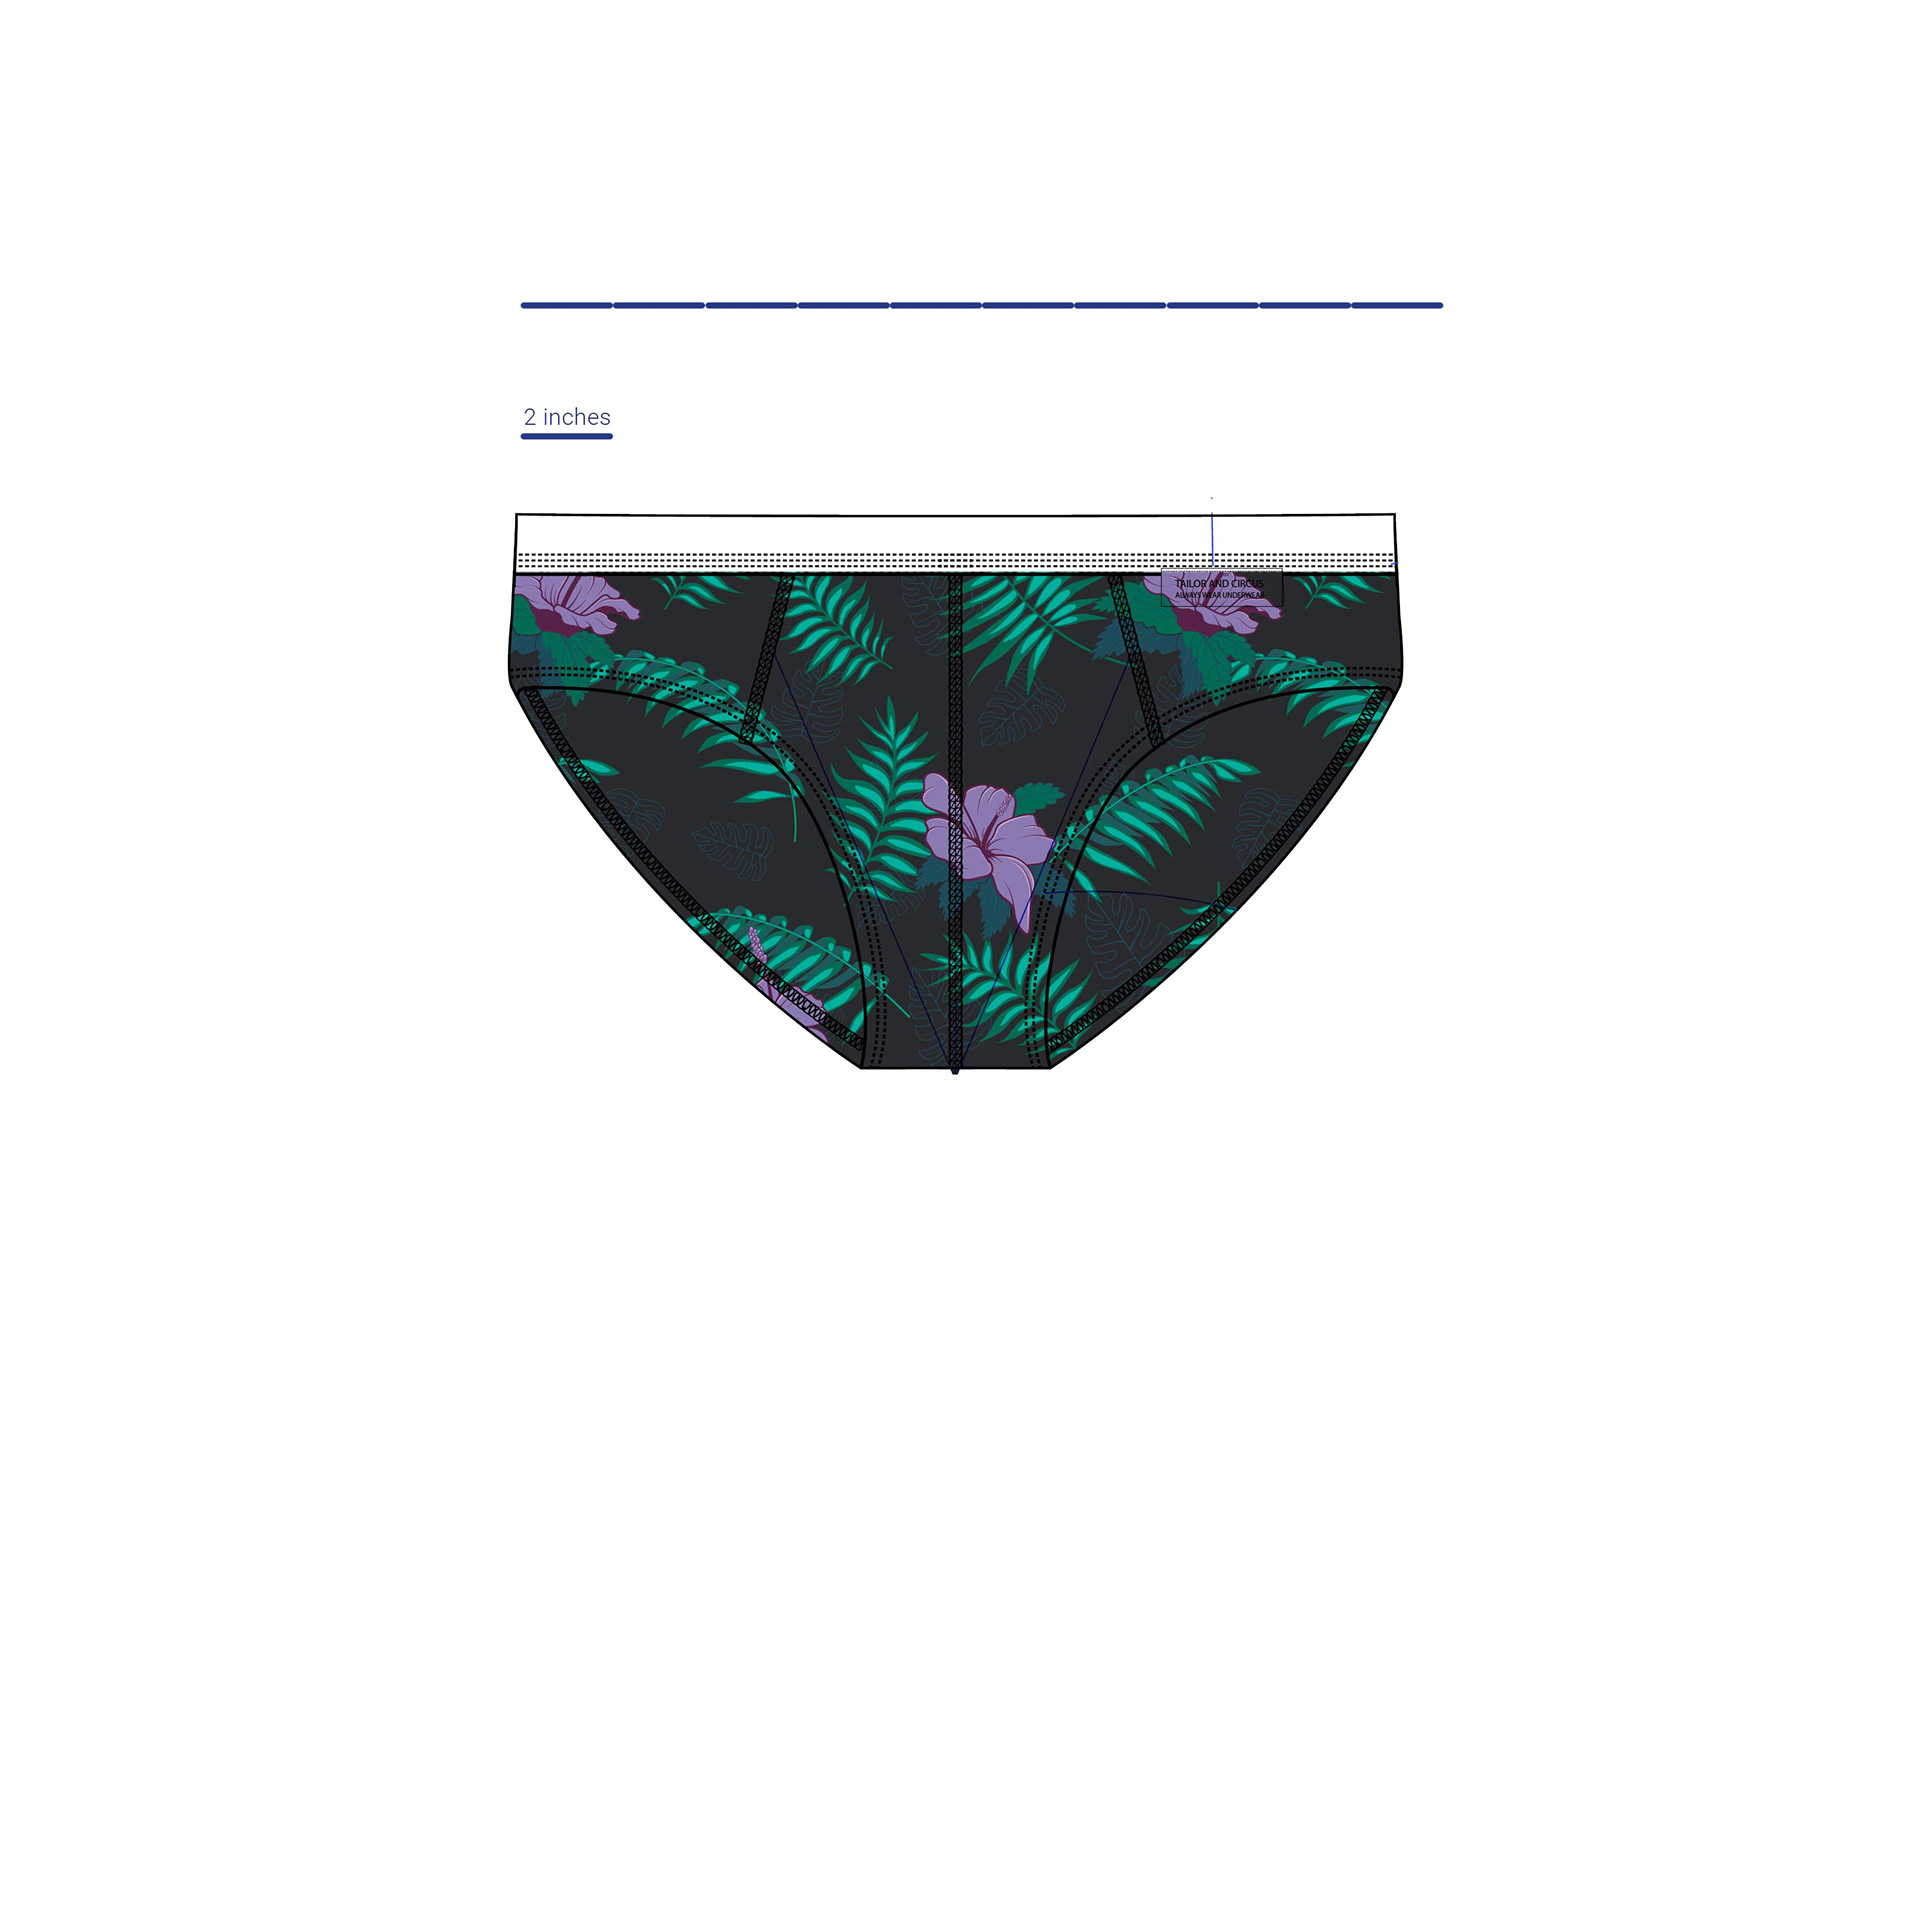 Tailor and Circus - Body Positive Unisex Underwear Brand with Quirky Prints  and Size Ranges